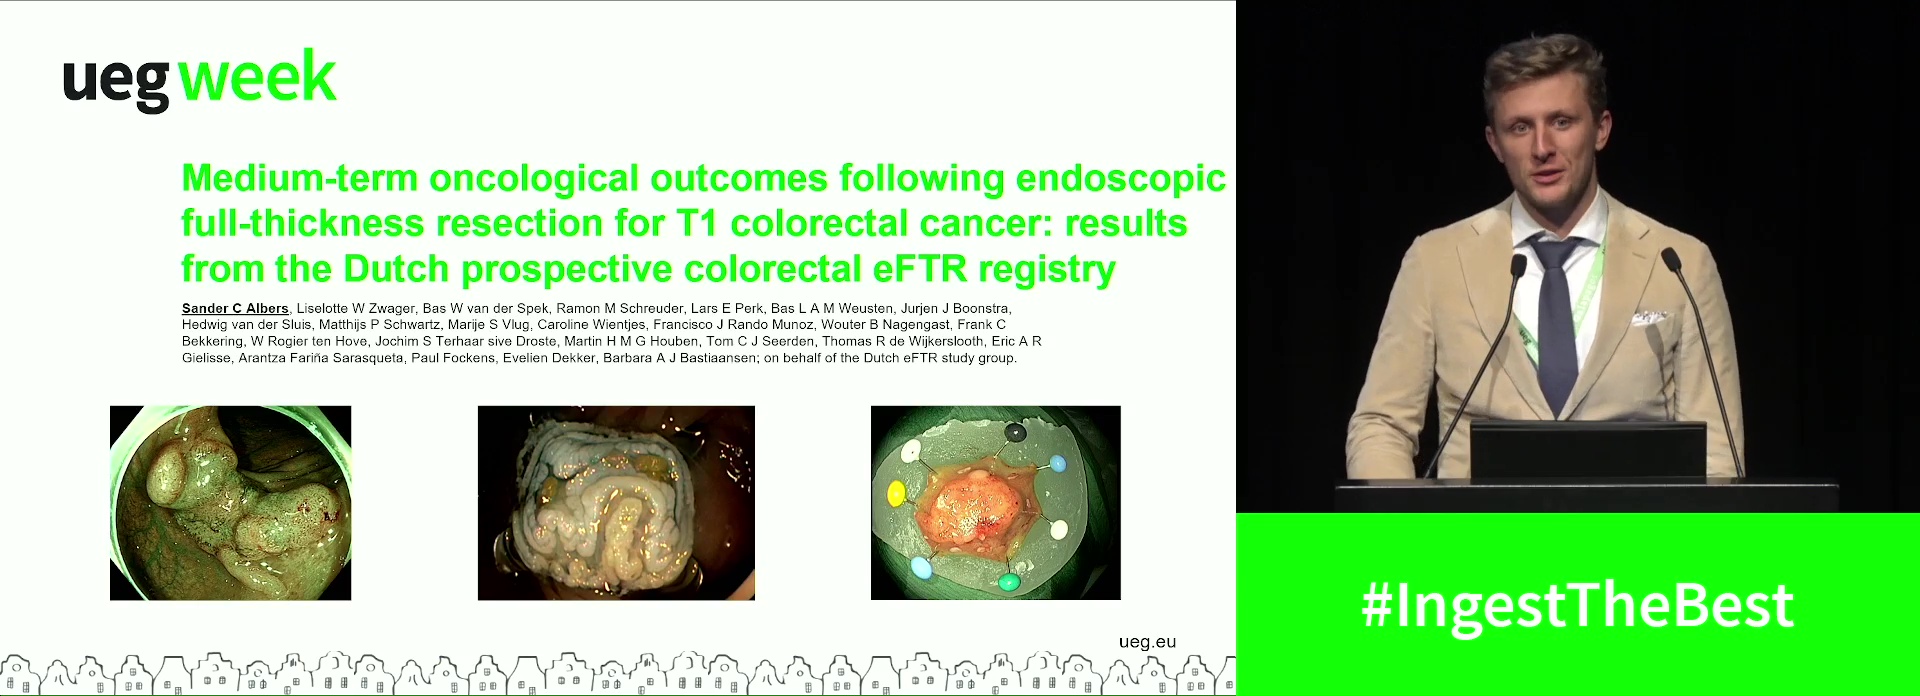 MEDIUM-TERM ONCOLOGICAL OUTCOMES FOLLOWING ENDOSCOPIC FULL-THICKNESS RESECTION FOR T1 COLORECTAL CANCER: RESULTS FROM THE DUTCH PROSPECTIVE COLORECTAL EFTR REGISTRY